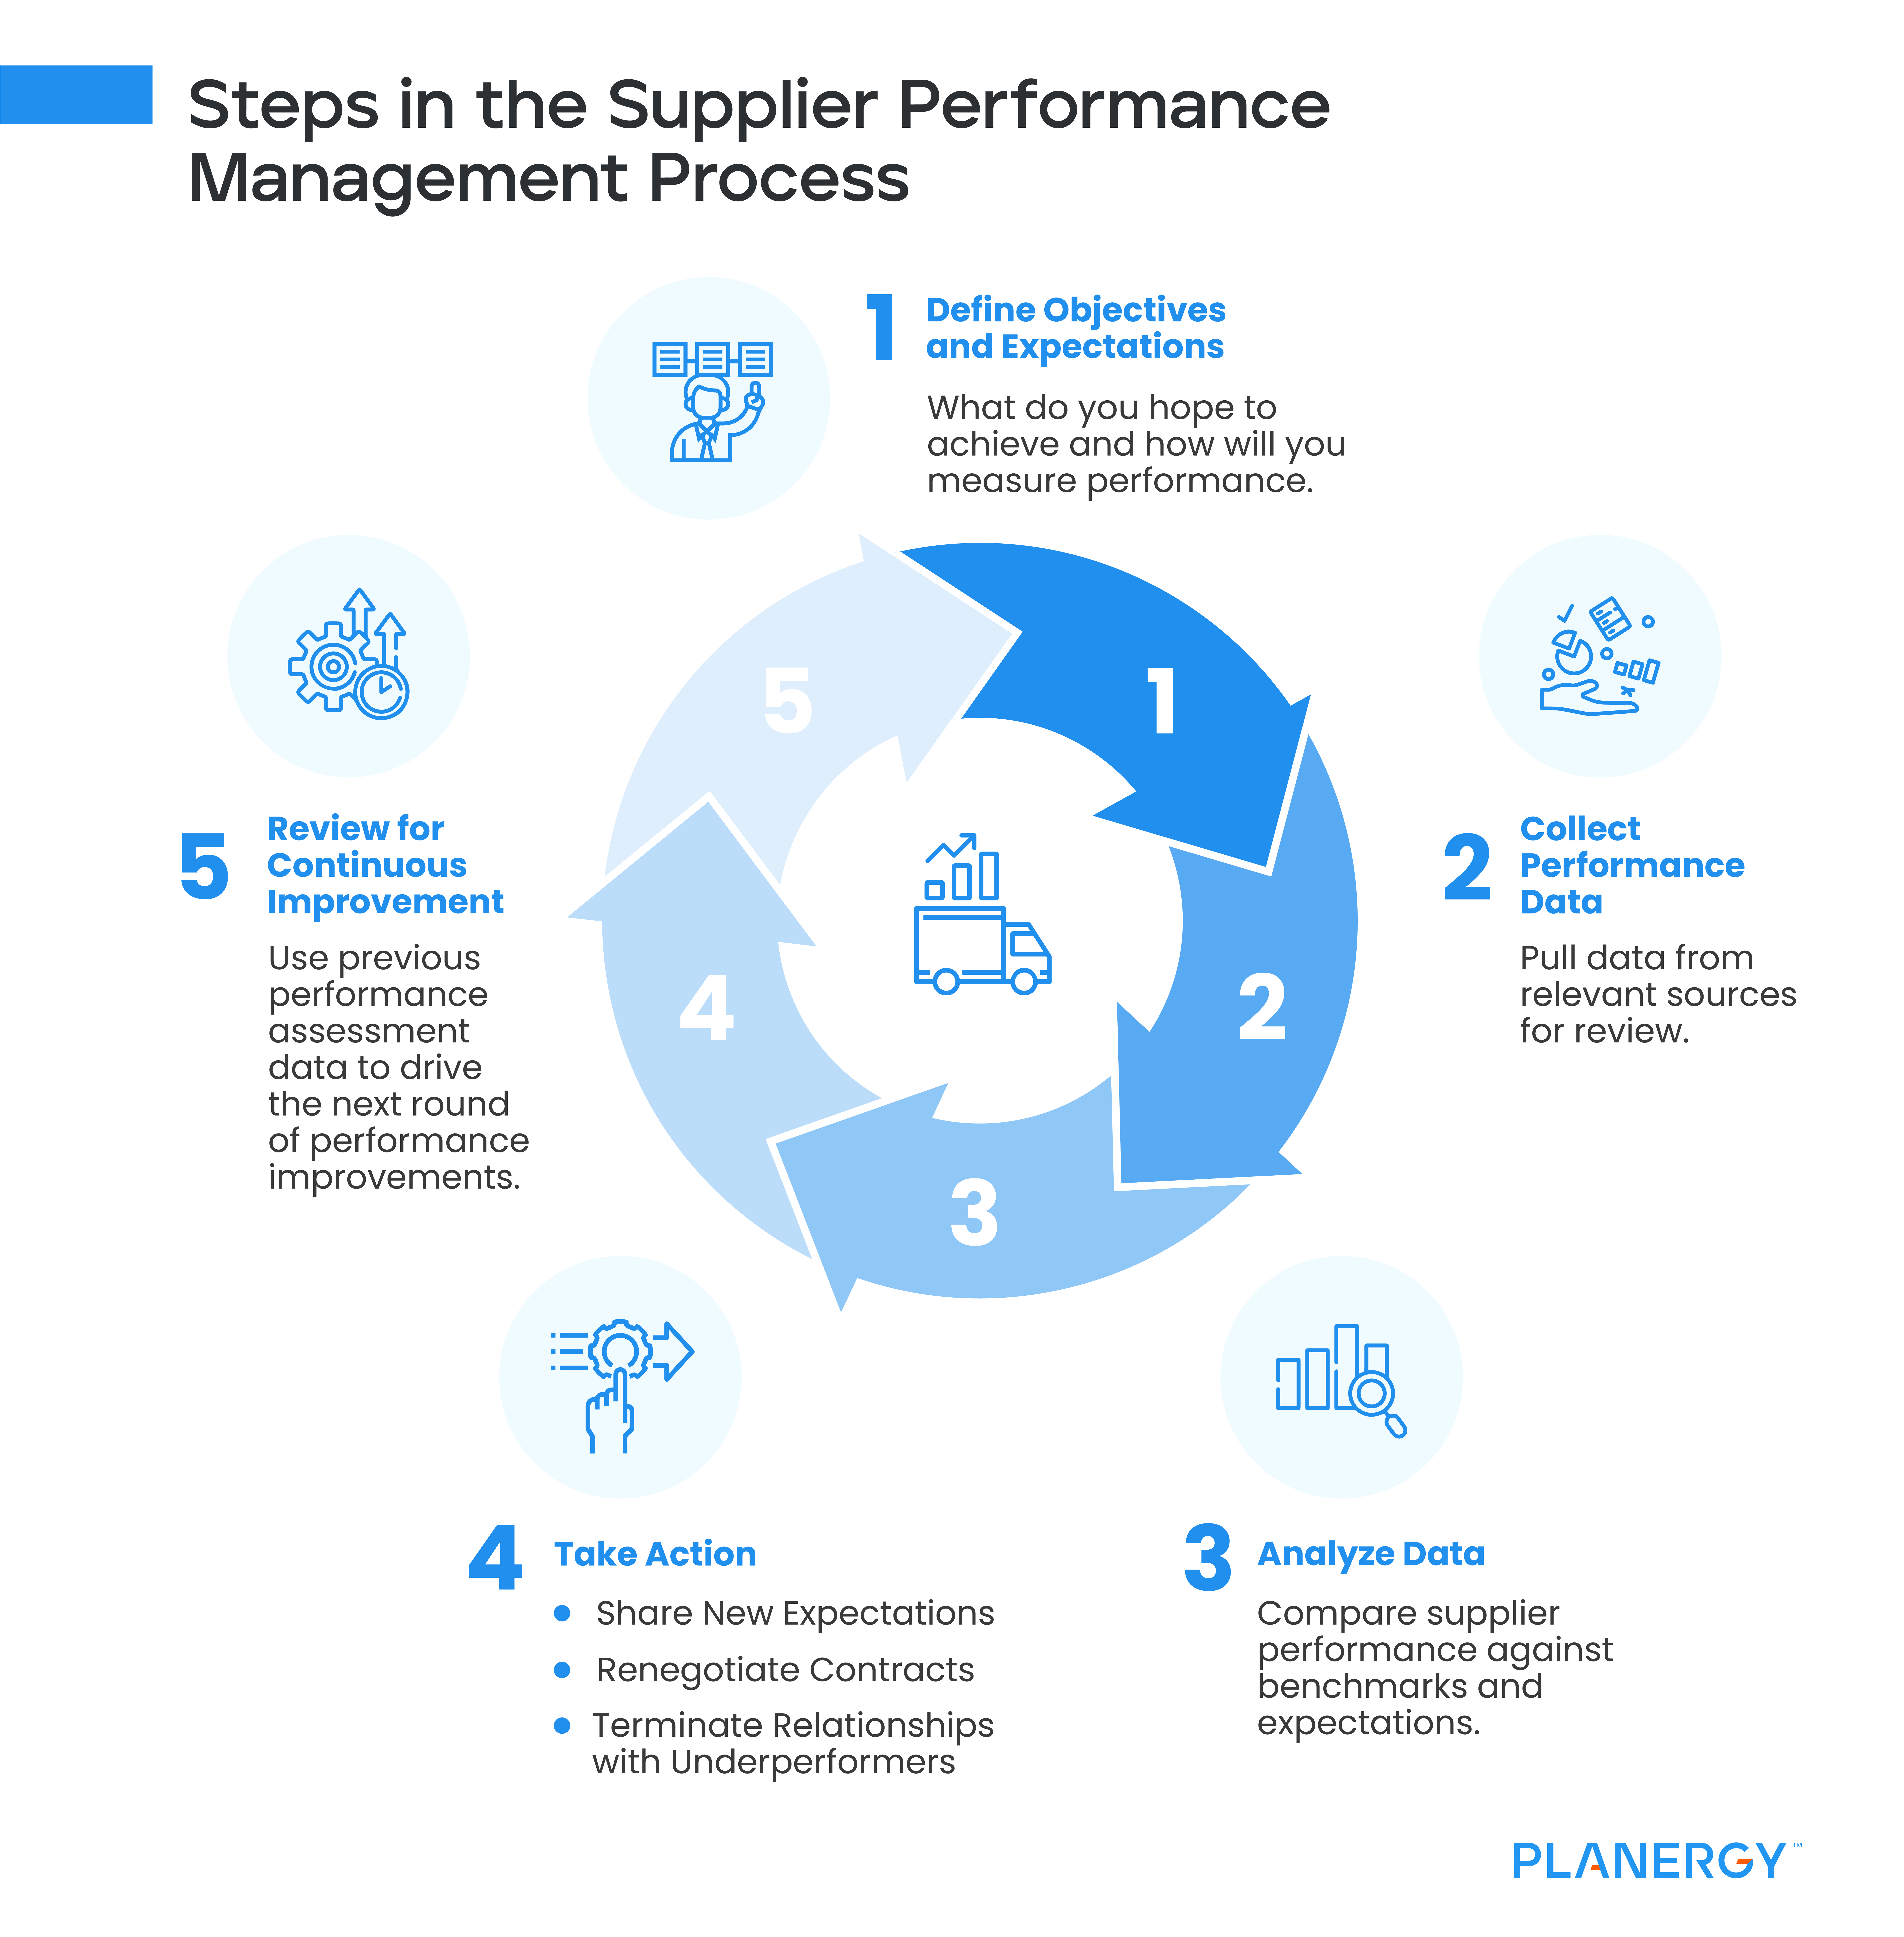 Steps in the Supplier Performance Management Process